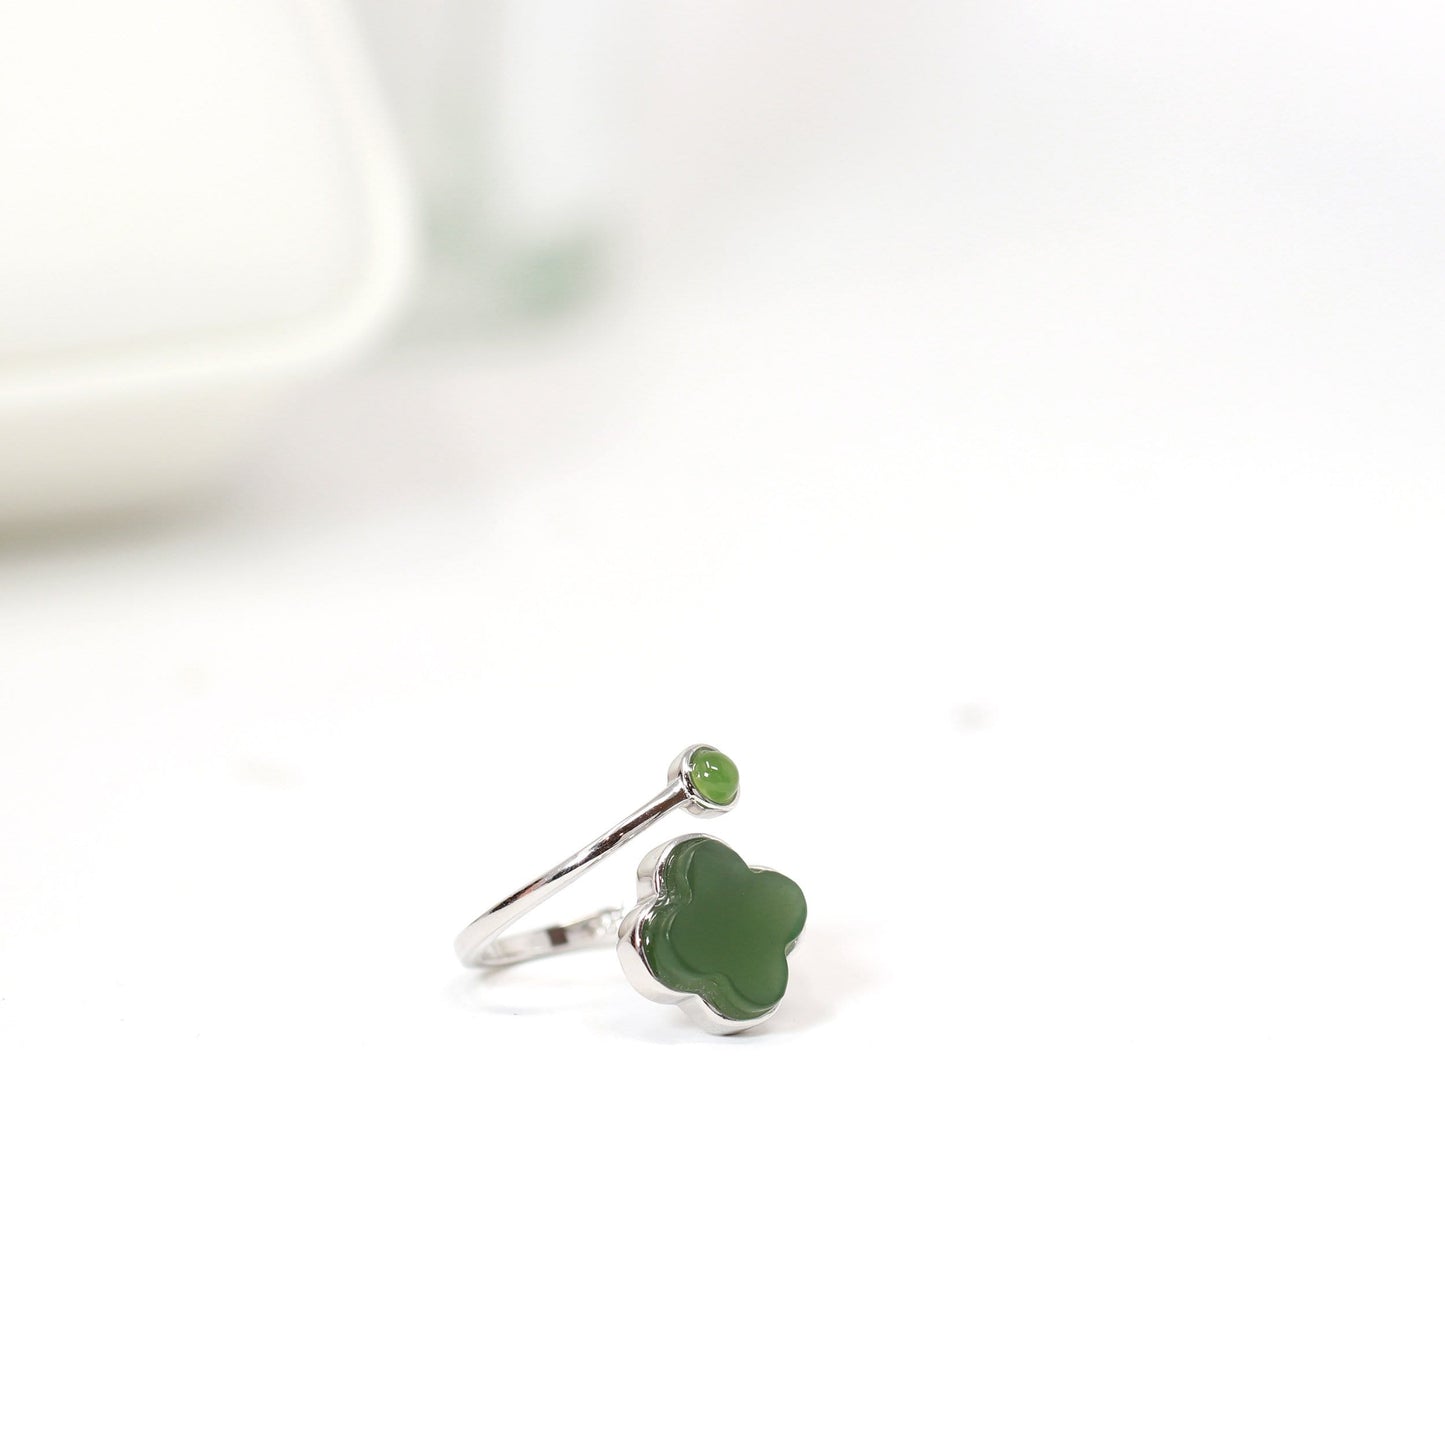 RealJade® Sterling Silver Real Green Nephrite Jade Lucky Four Leaf Clover Ring